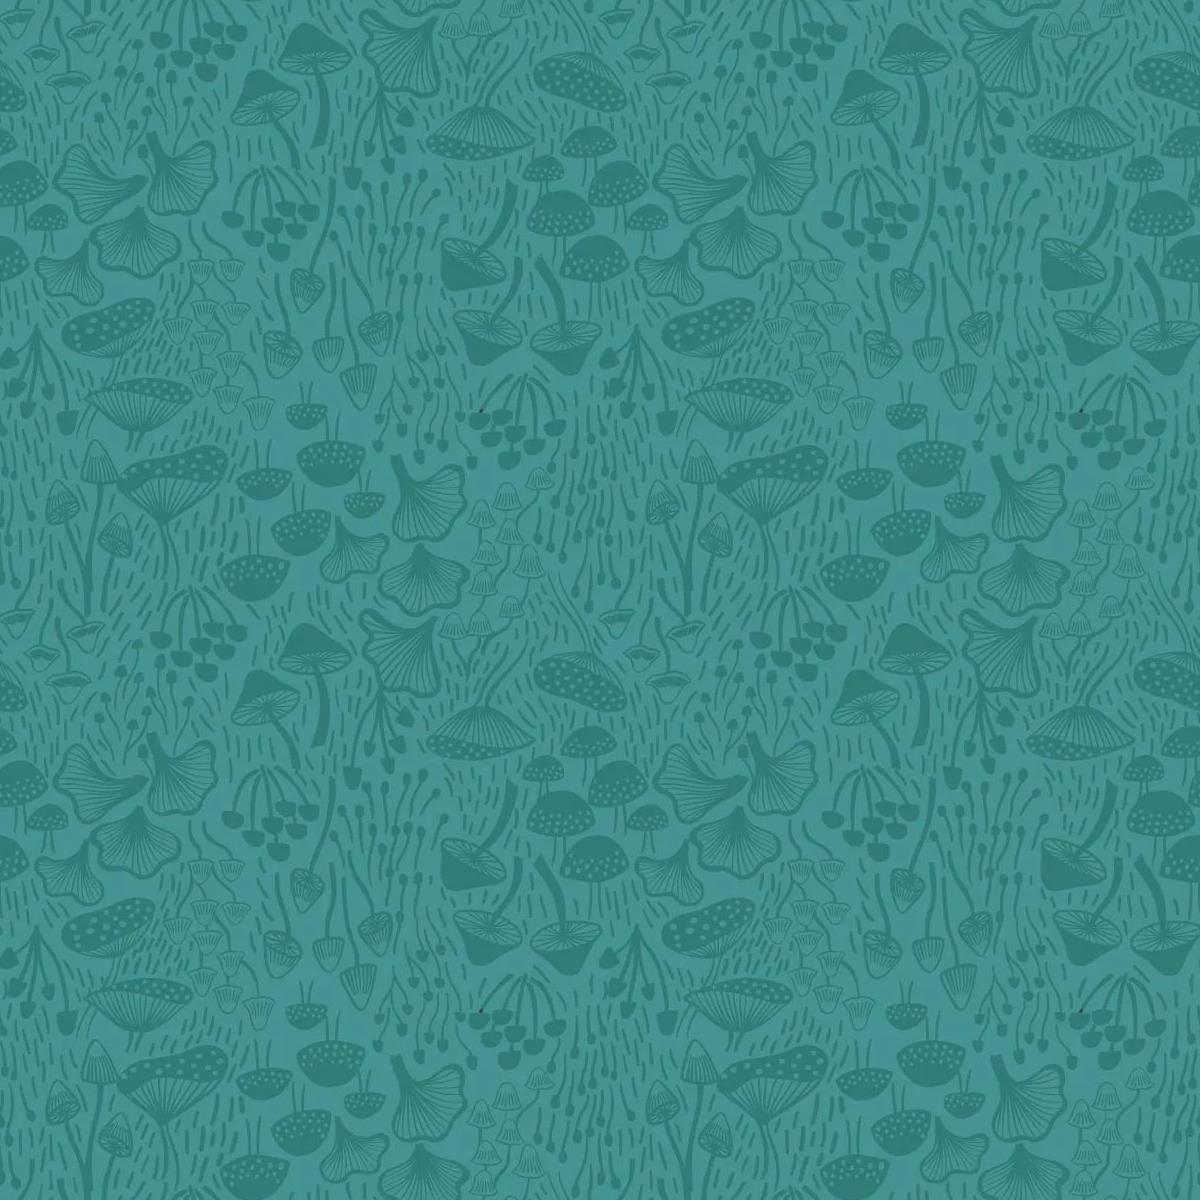 /images/product-images/2020images/FashionFabric/CraftCotton/LINov21/A546.2-Fantastic-fungi-on-teal.jpg